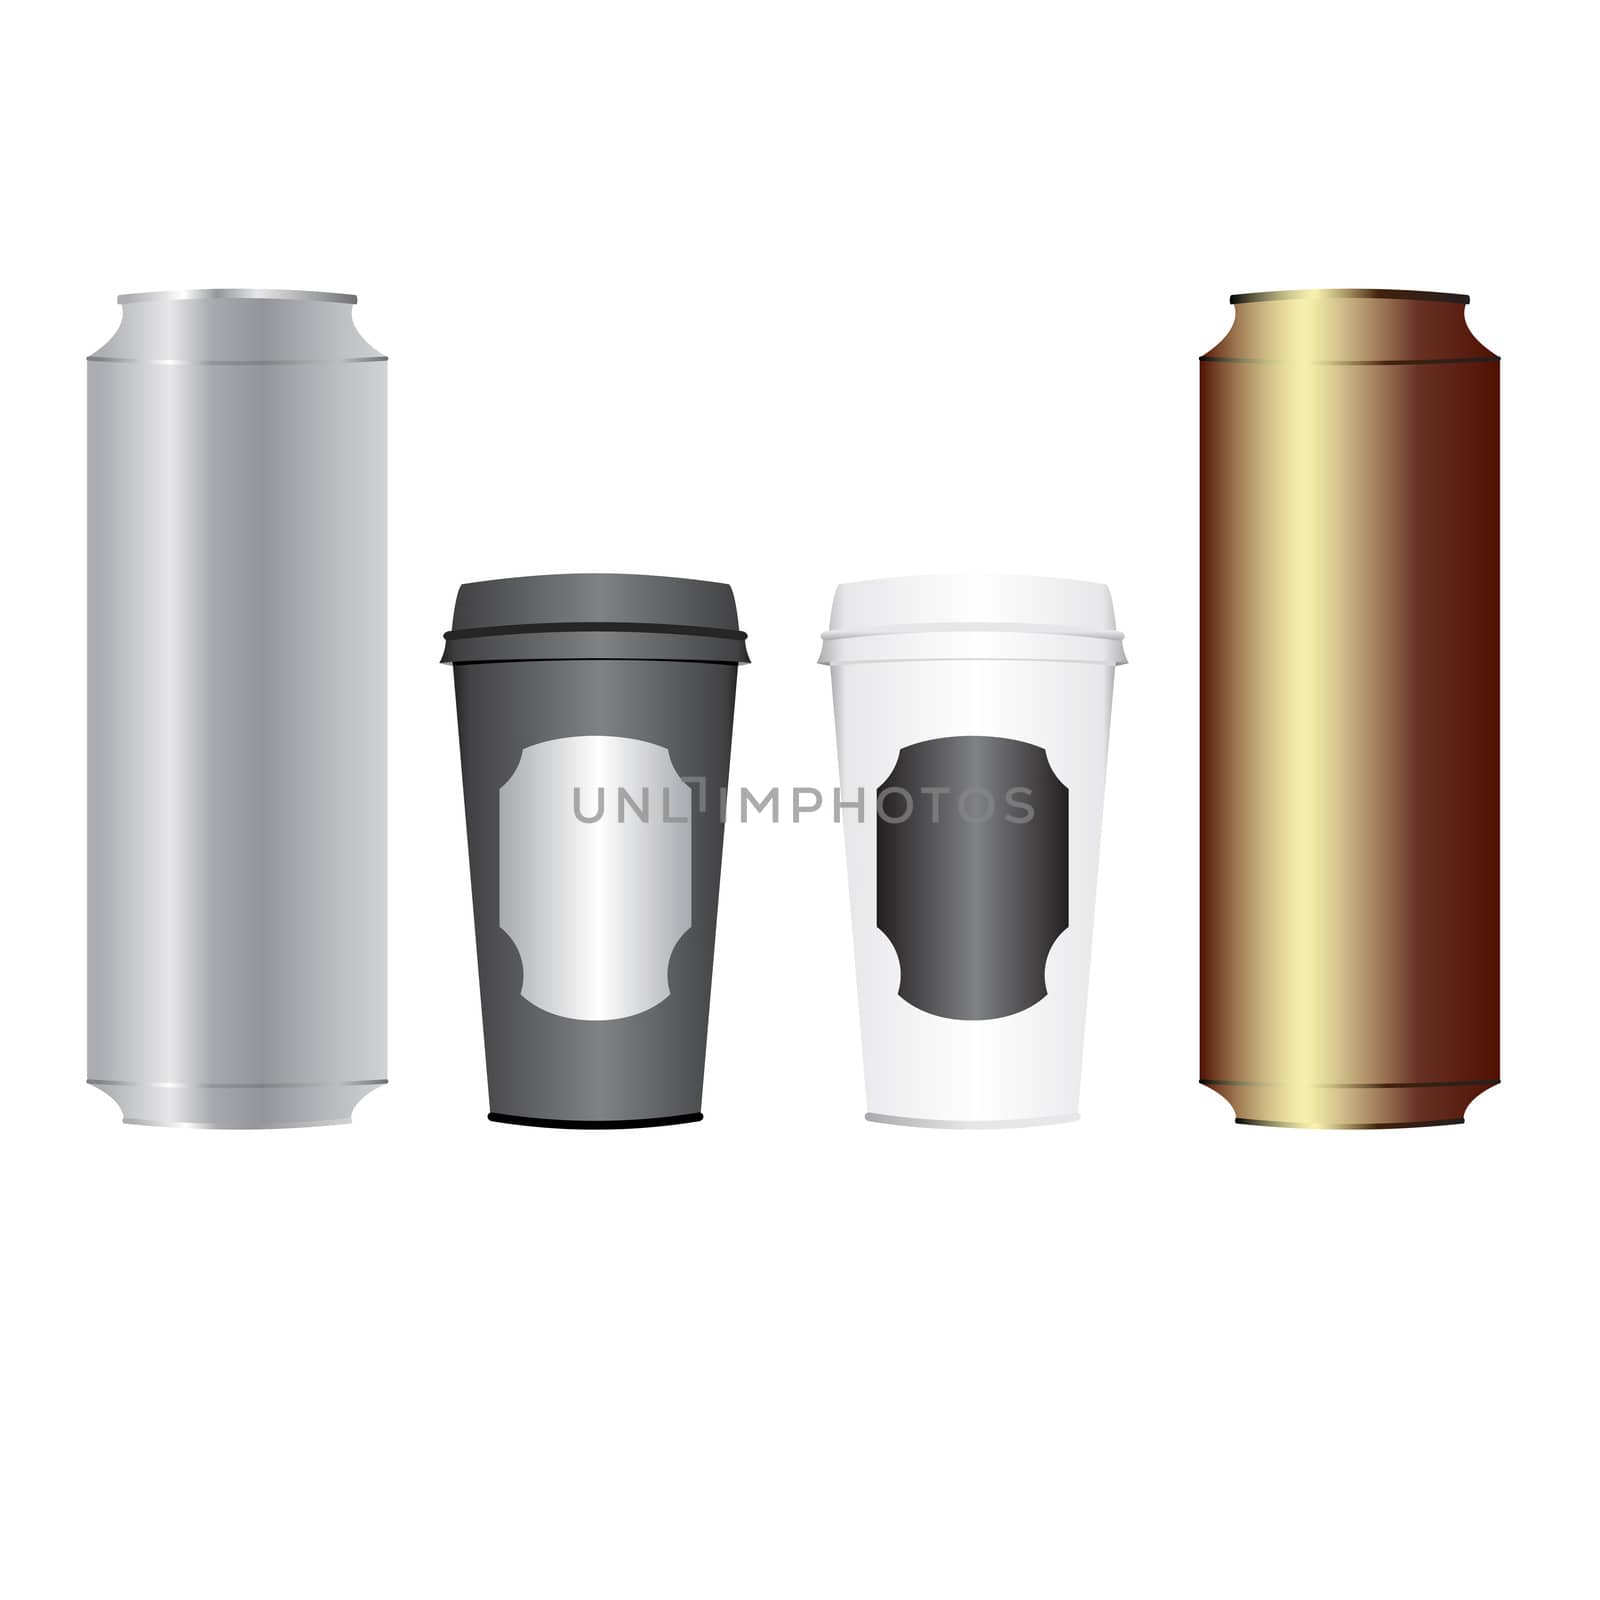 Beer cans and coffee cups by Lirch